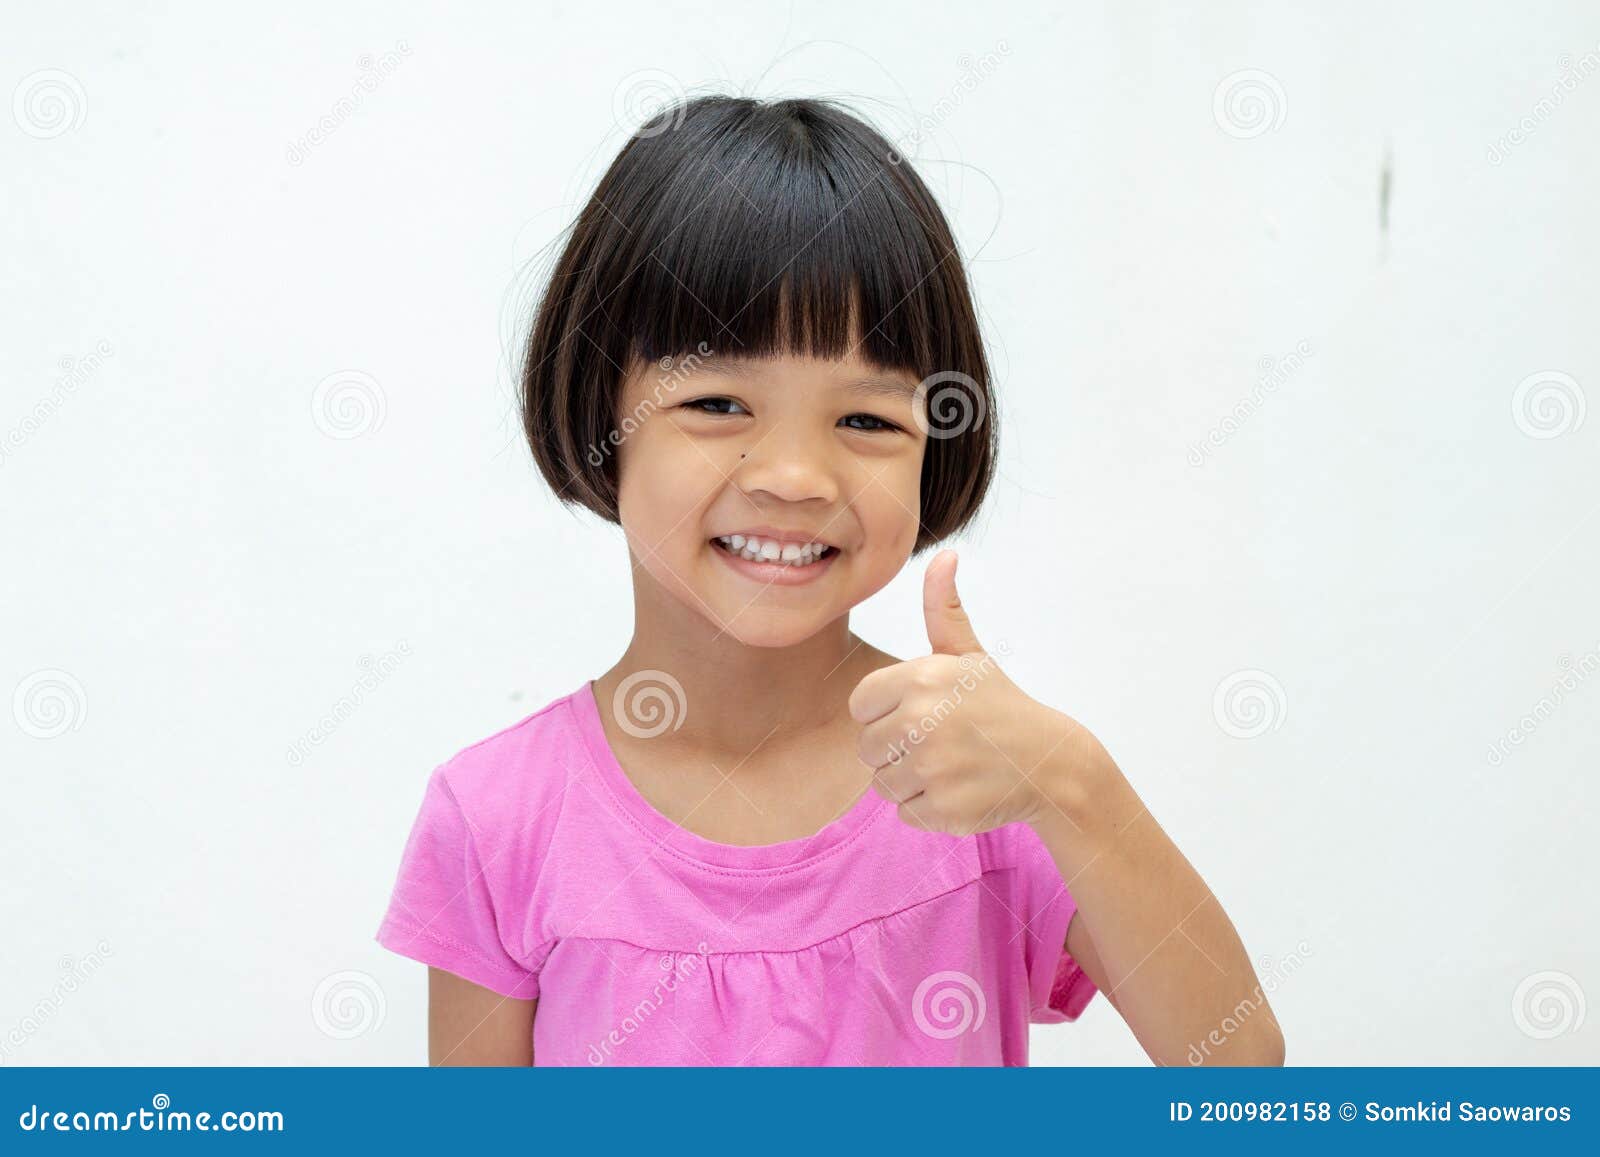 Asian Kid Girl Aged 4 To 6 Years Old with Short Hair, Cute Face and Smiling  Smile. Wear a Pink Shirt Raises the Right Hand and Stock Photo - Image of  people, pink: 200982158